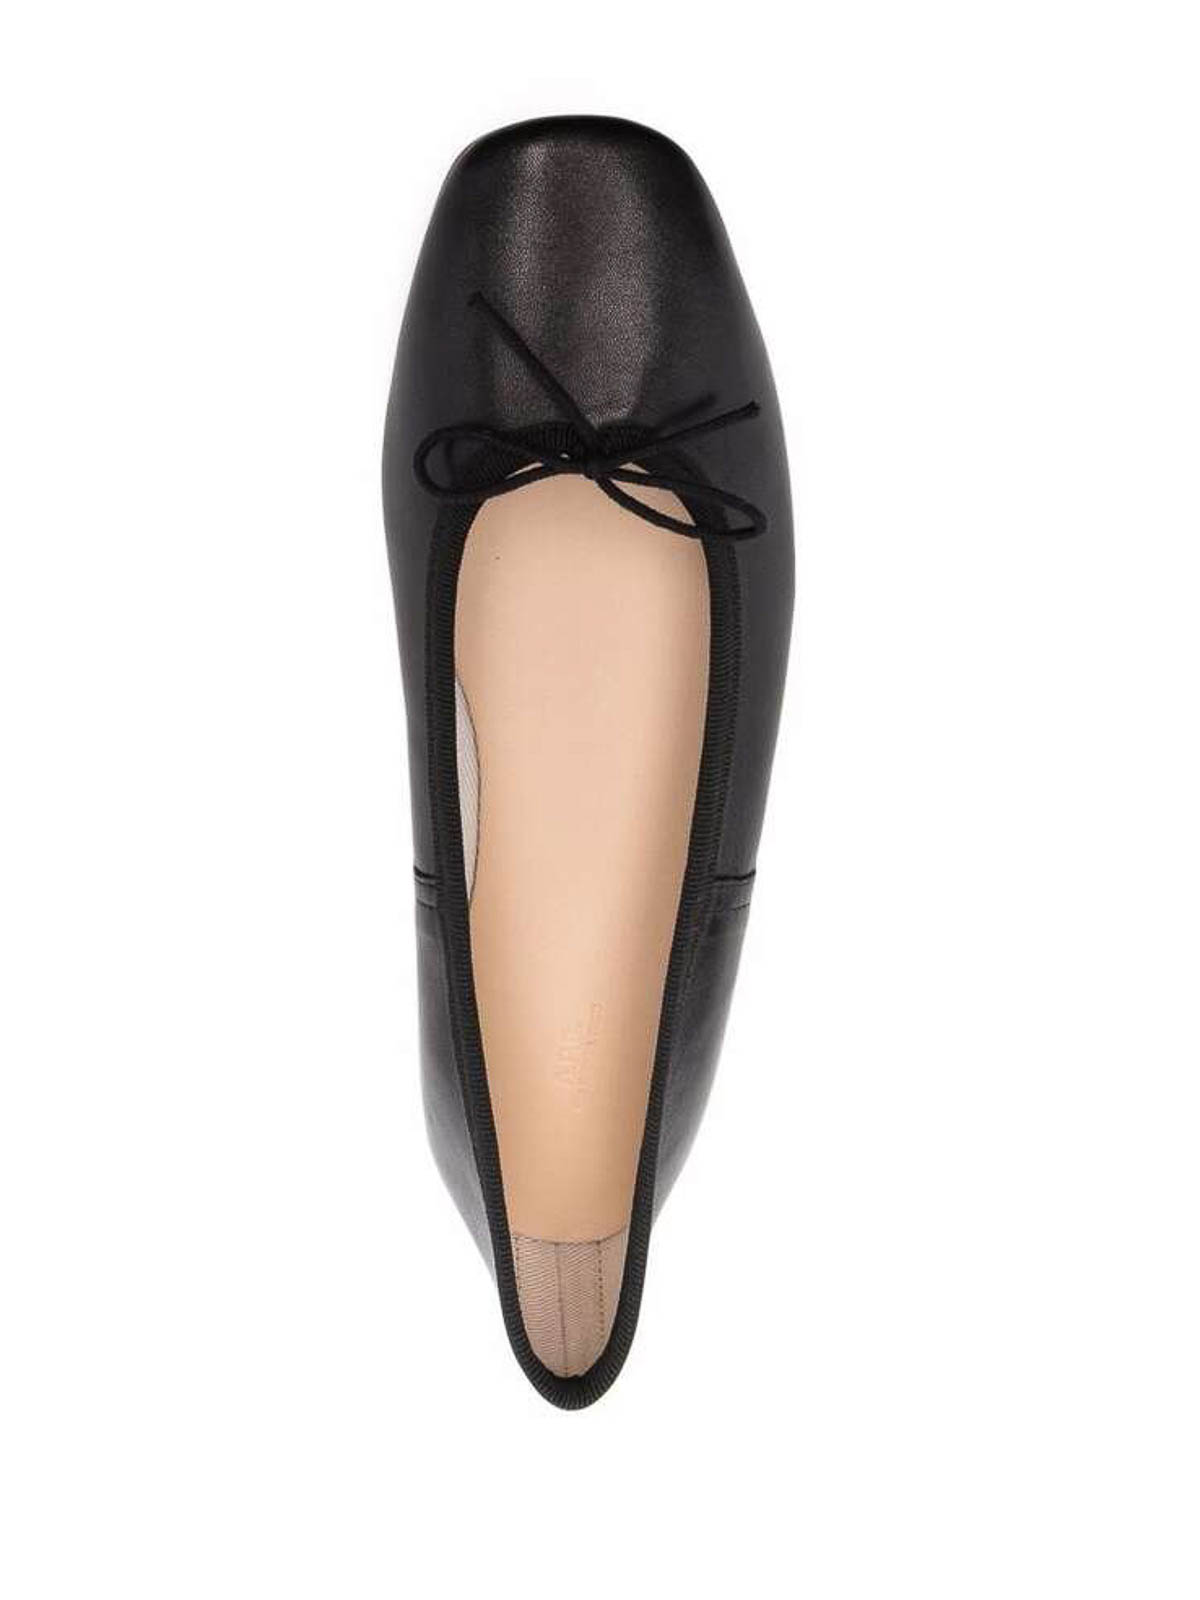 Shop Apc Black Ballerina Shoes With Bow Detailing